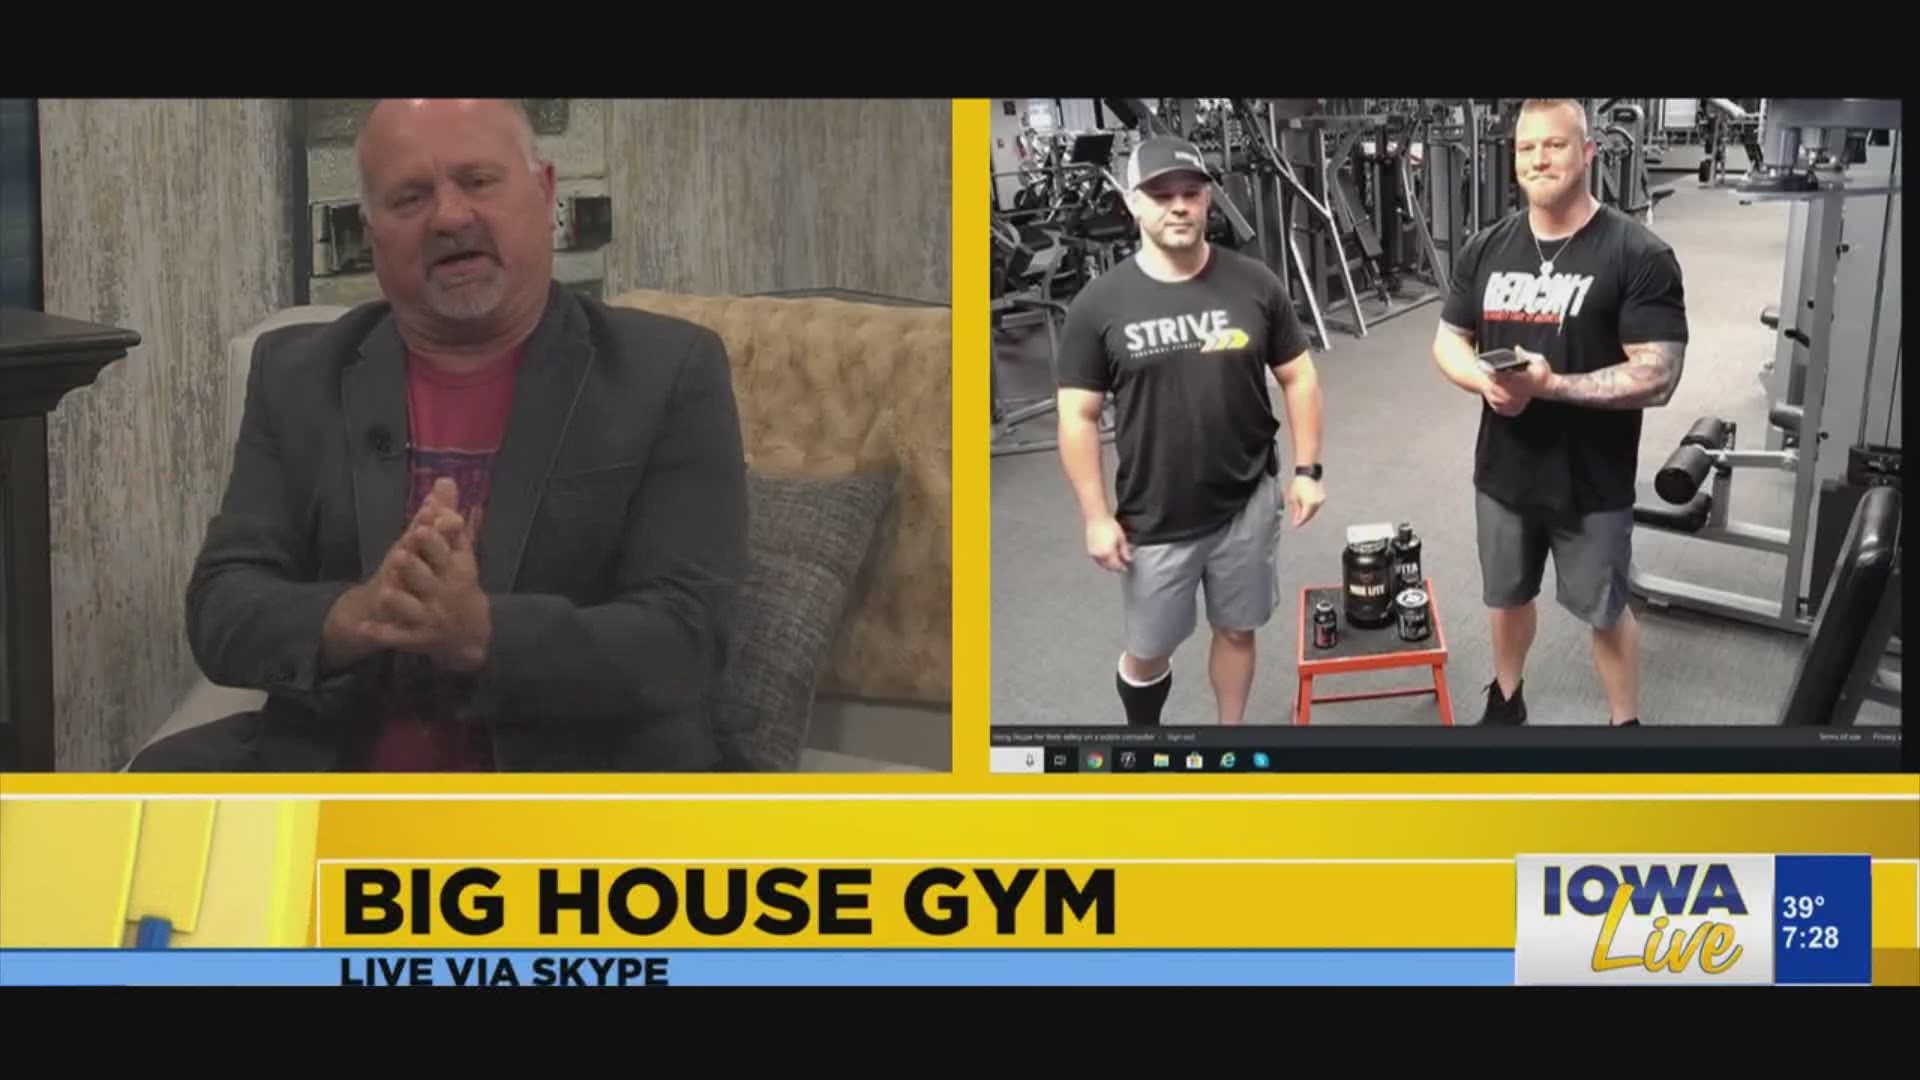 Make smart choices at home with Big House Gym's nutrition